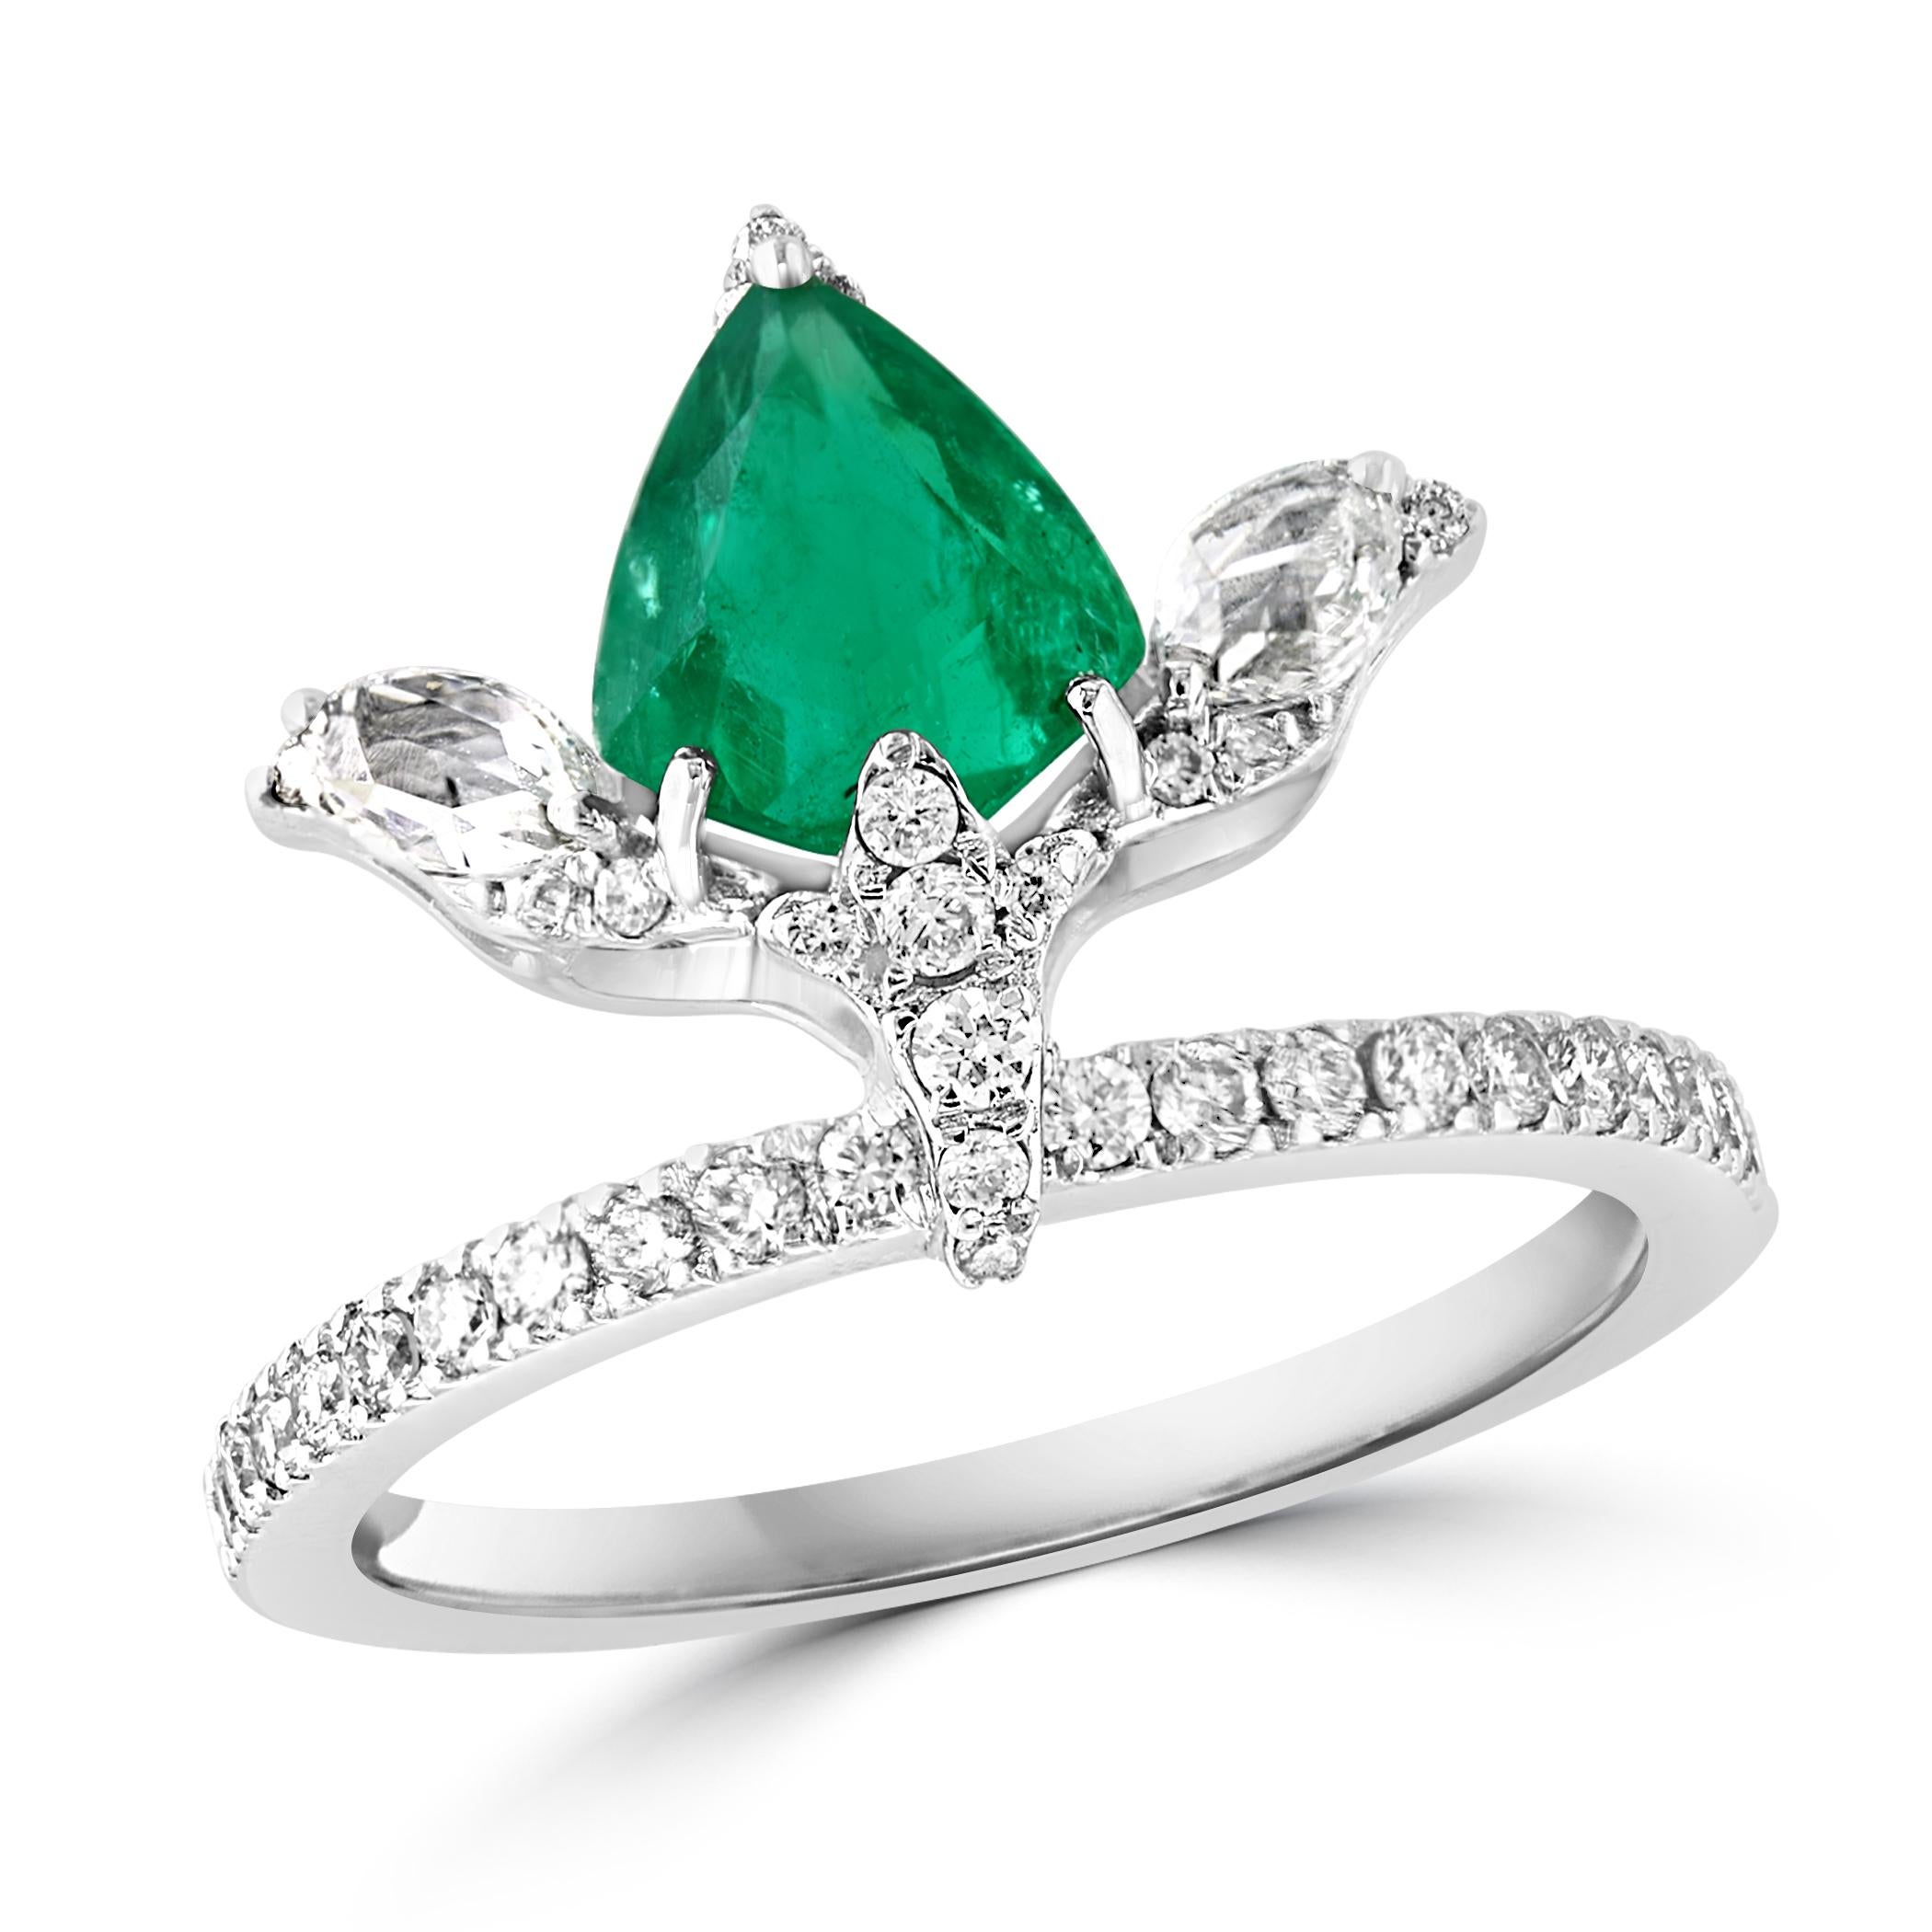 1.2 Ct Finest Zambian Pear Emerald & 1 Ct Diamond Ring in 18 Kt Gold Size 6.5 For Sale